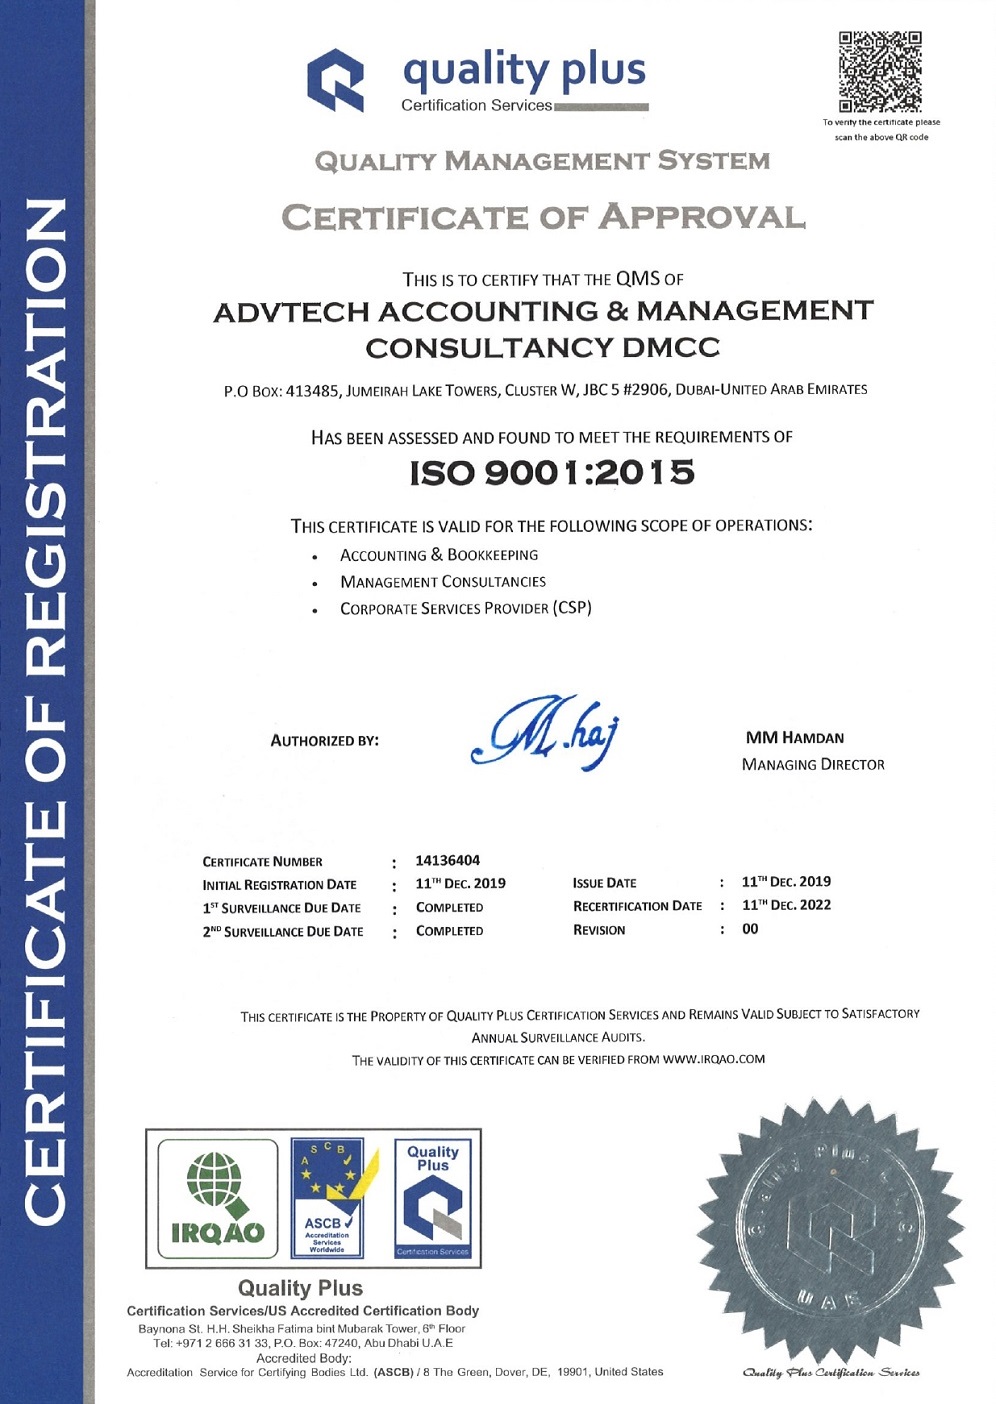 ISO 9001 2015 Certificate 2021-2022